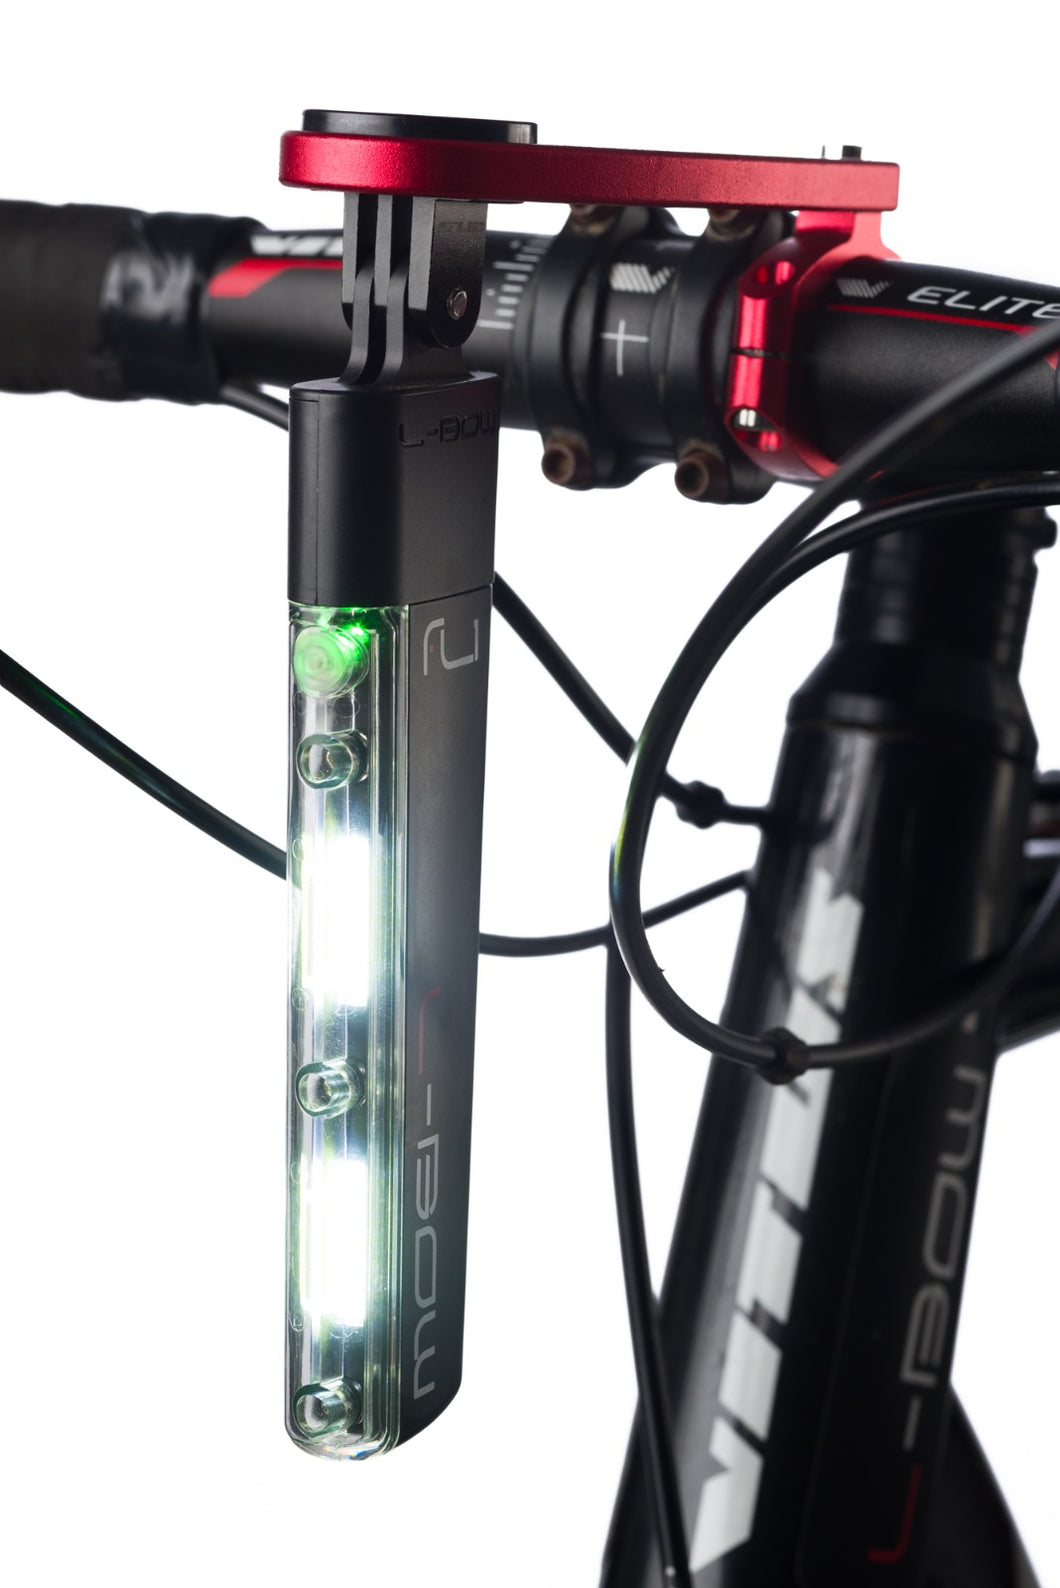 L-Bow FL1 Front Bike Light with Gub handlebar computer mount included